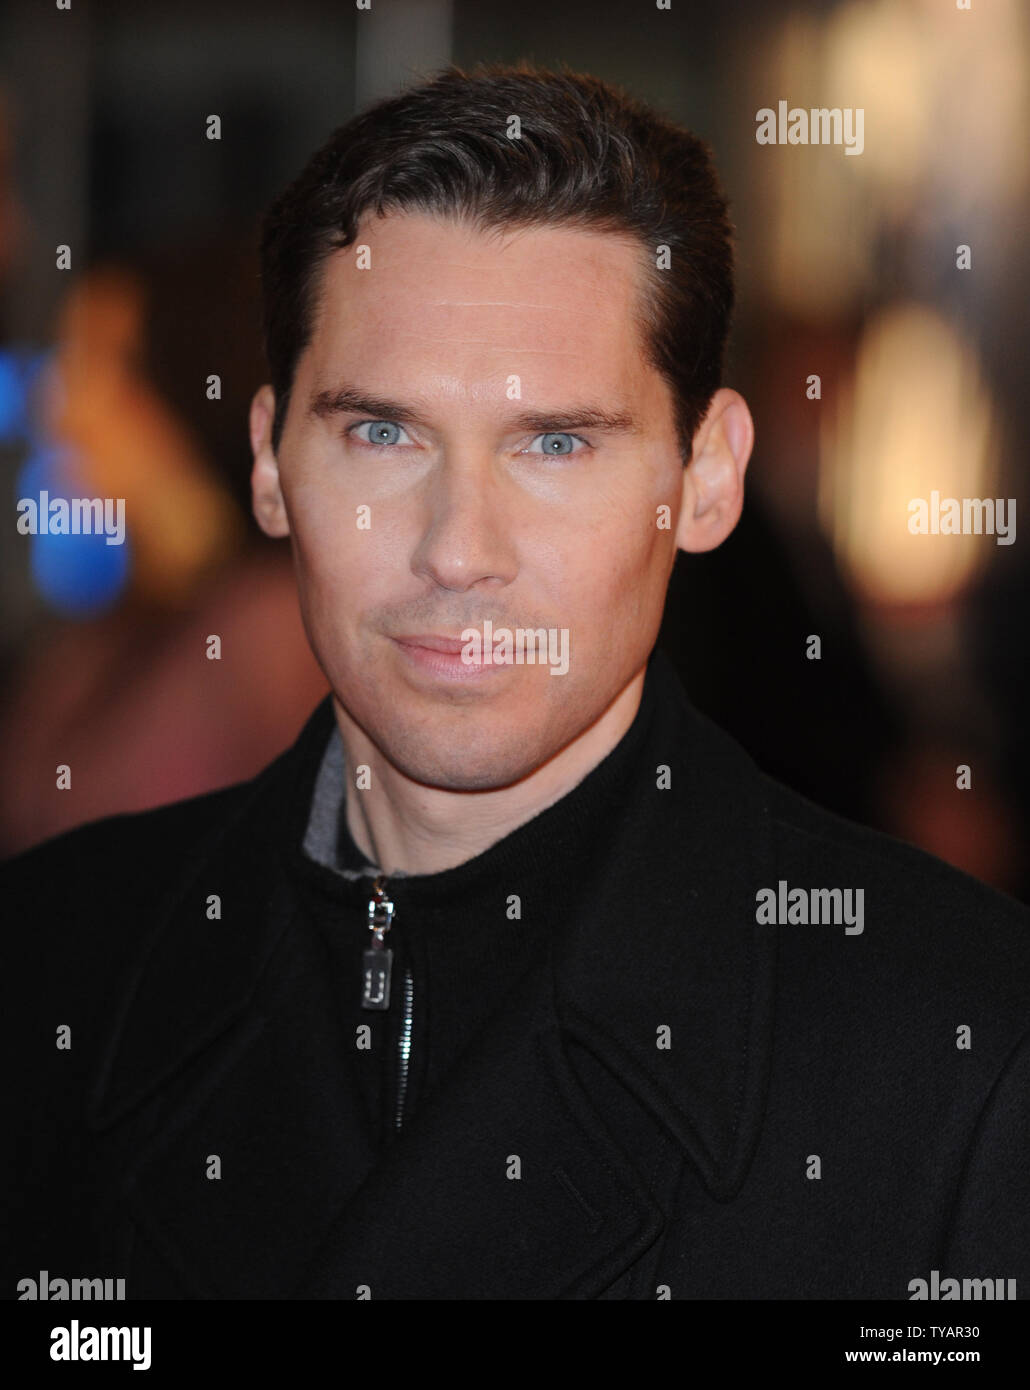 American director Bryan Singer attends the premiere of 'Valkyrie' at Odeon, Leicester Square in London on January 21, 2009.  (UPI Photo/Rune Hellestad) Stock Photo